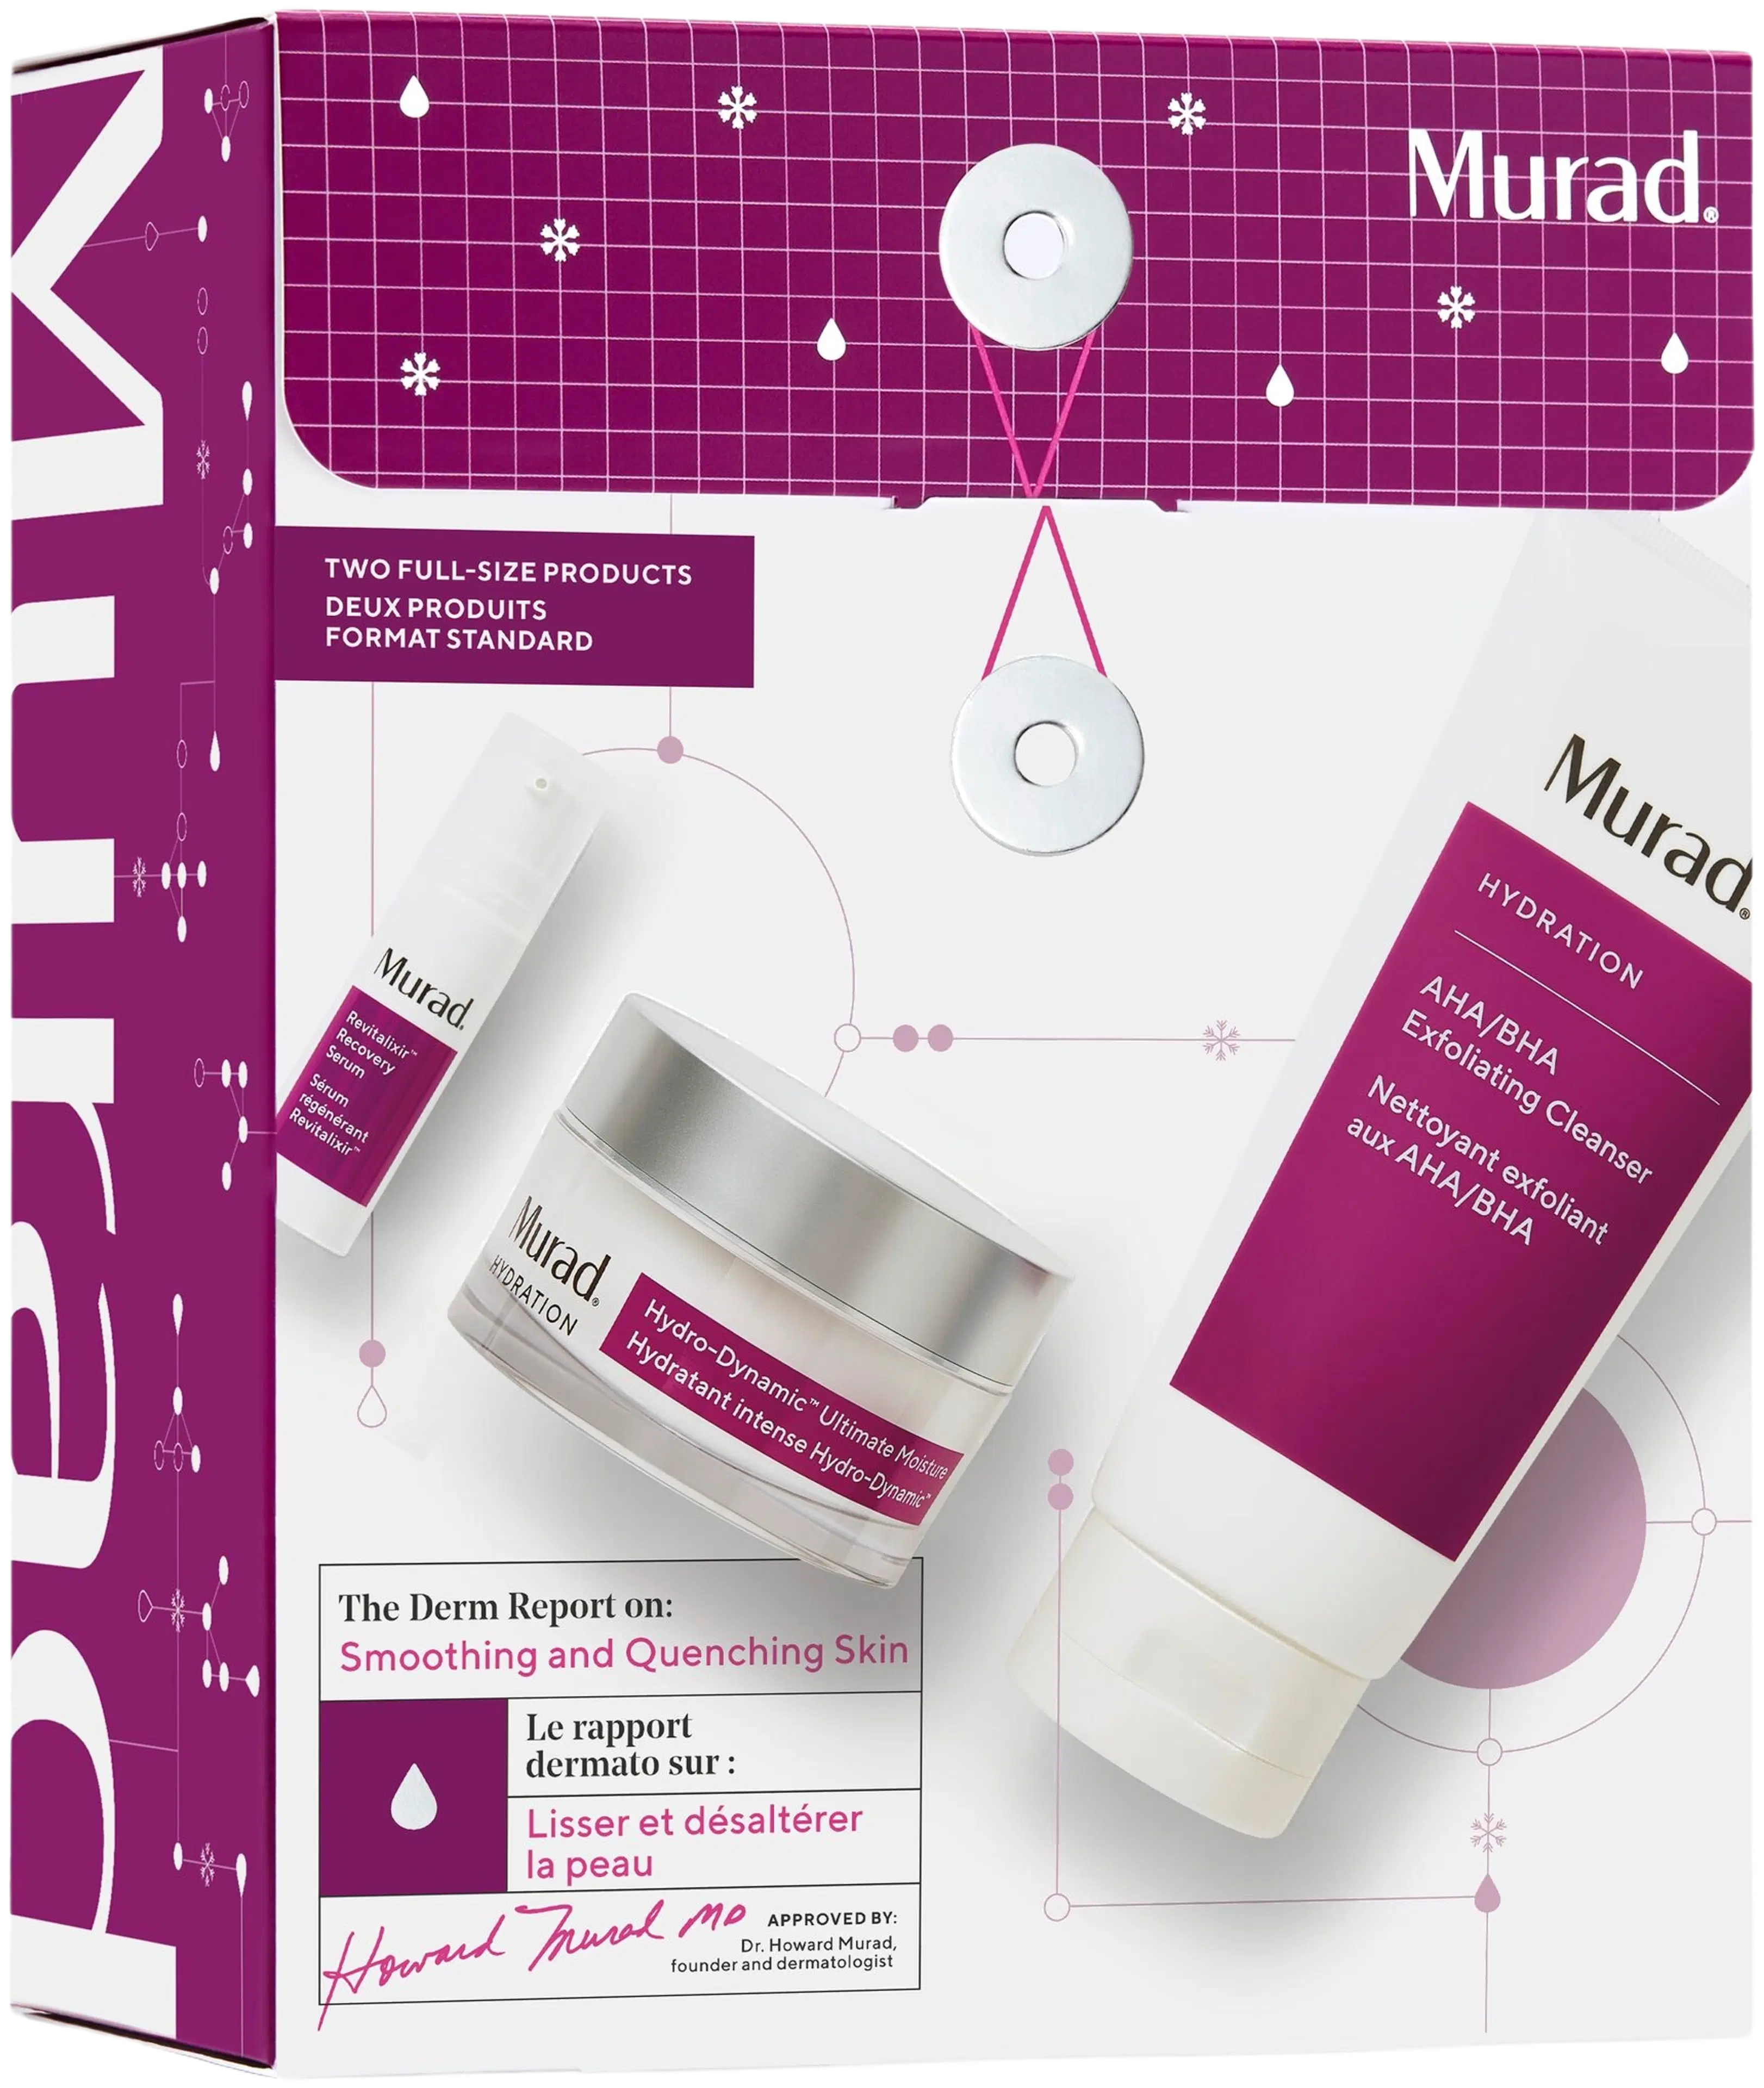 Murad smoothing and quenching skin